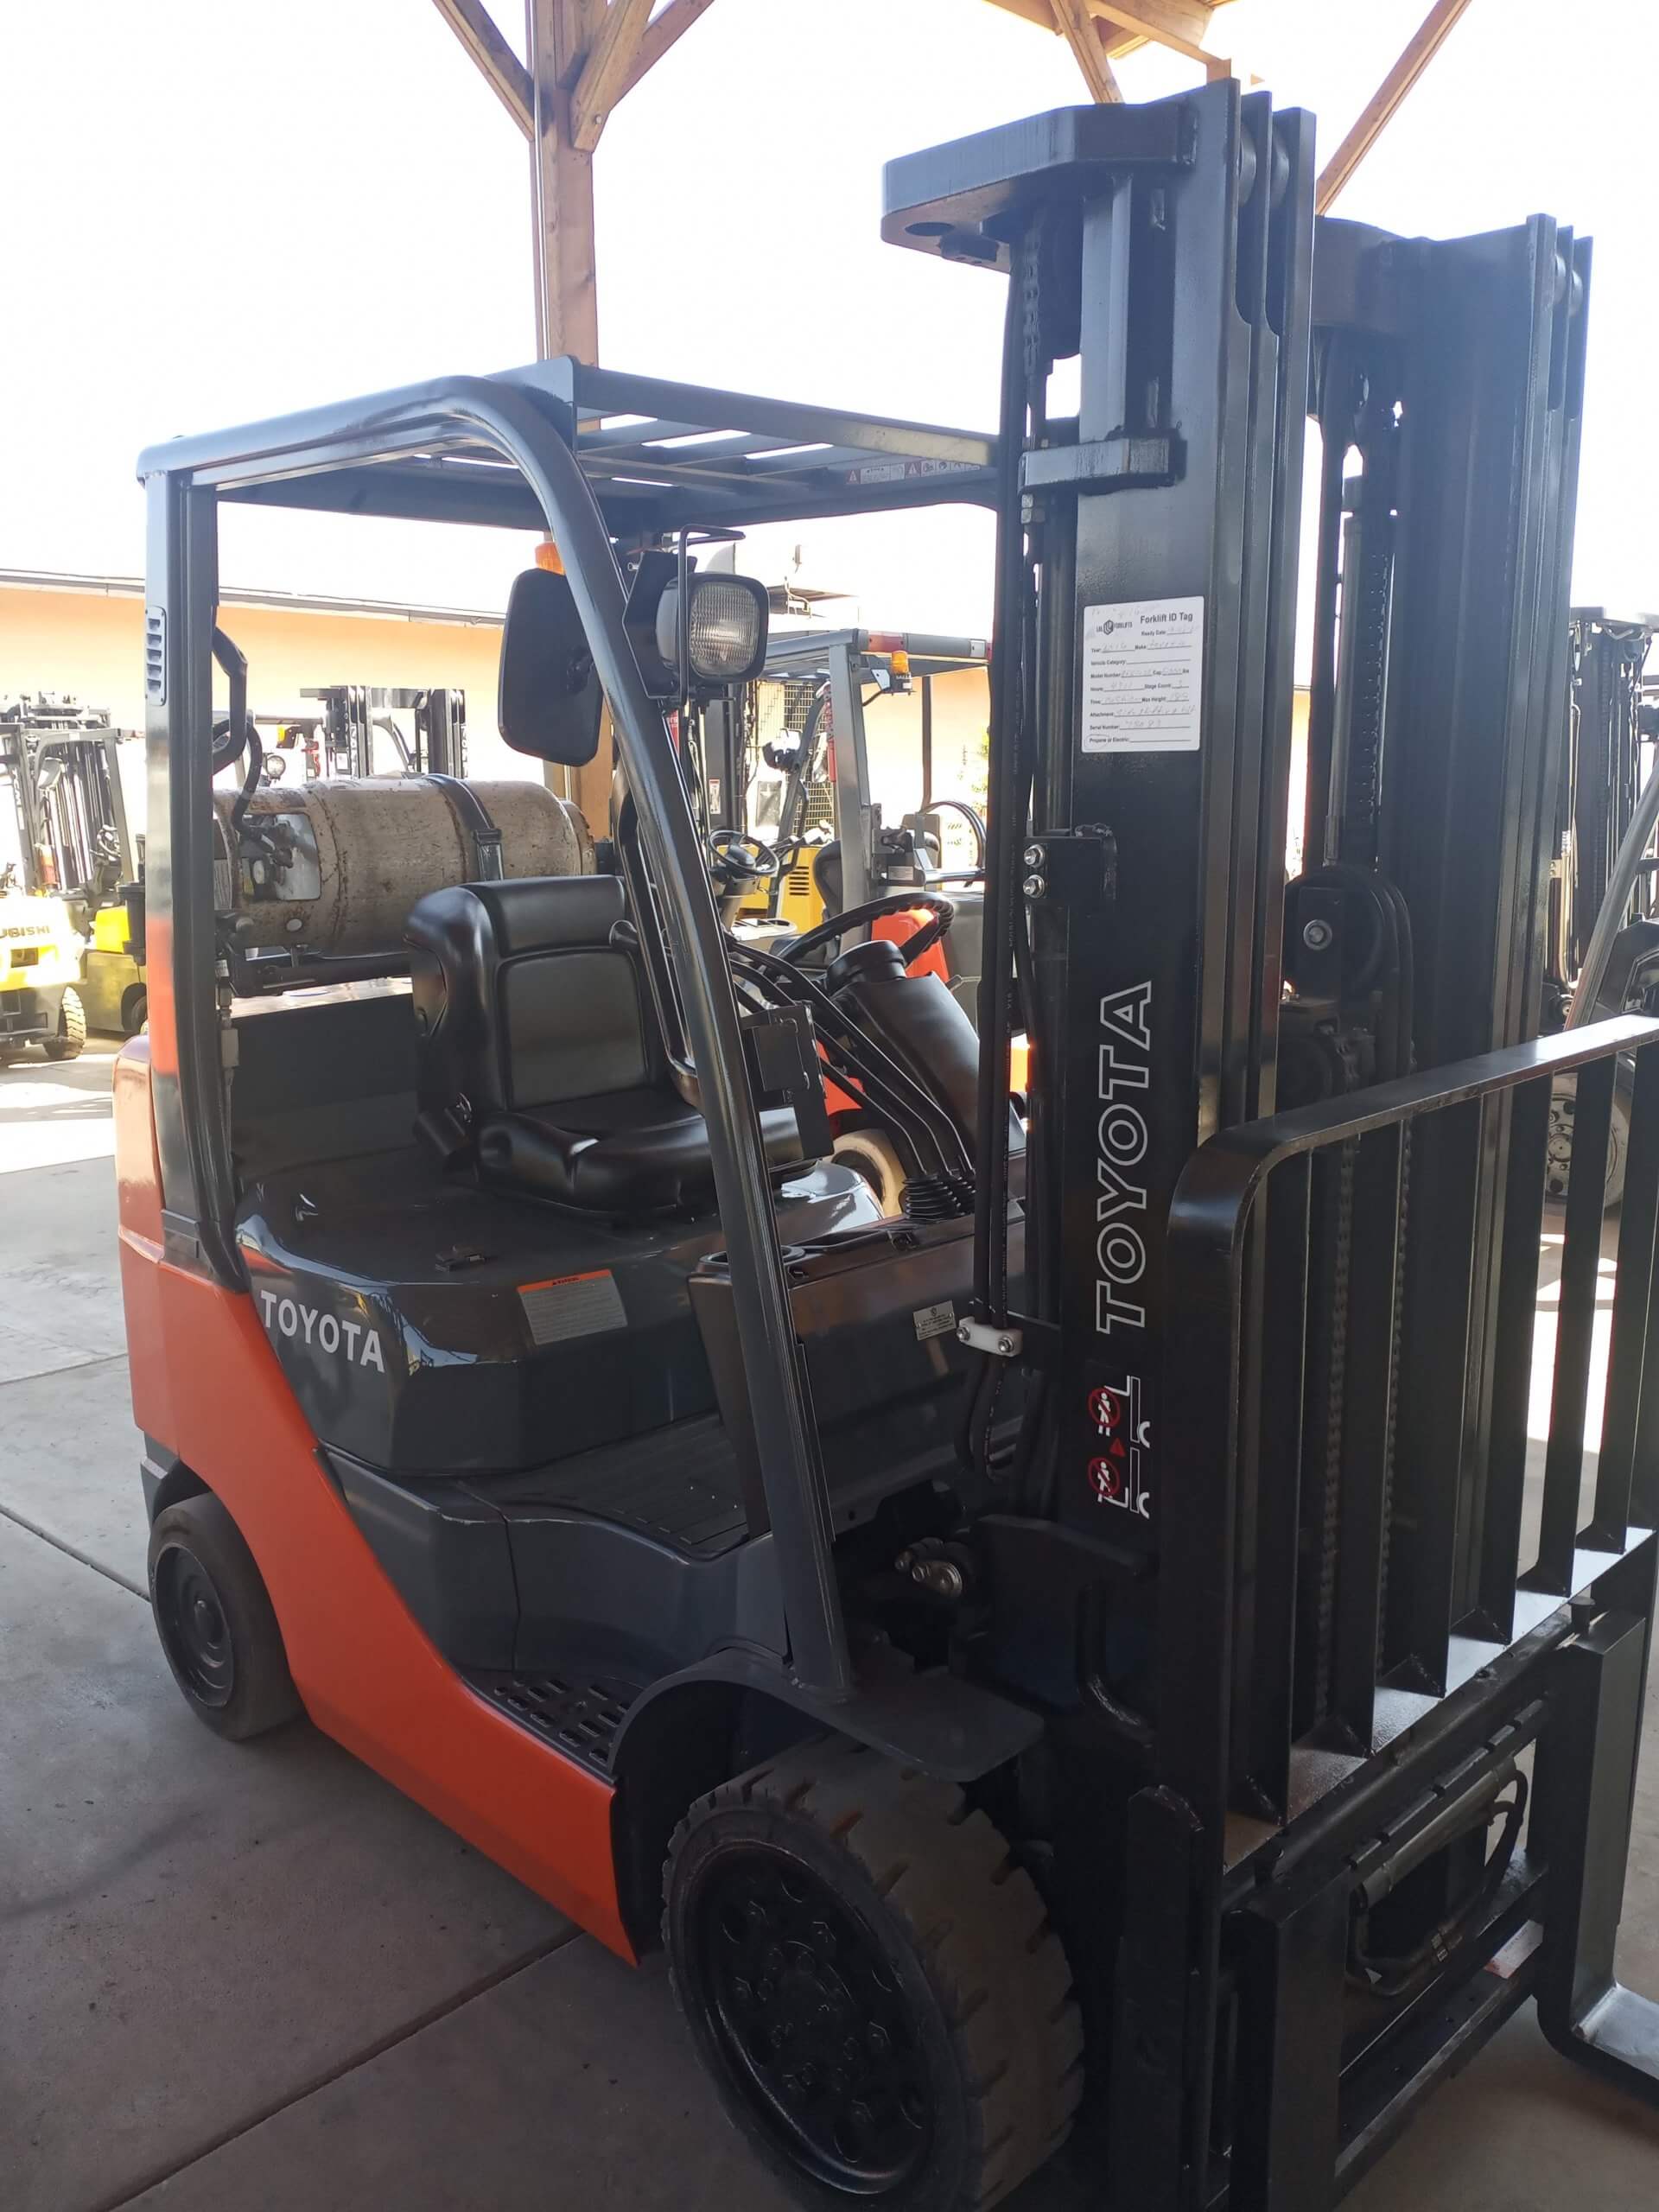 2016 Toyota Forklift For Sale L L Forklifts Southern California